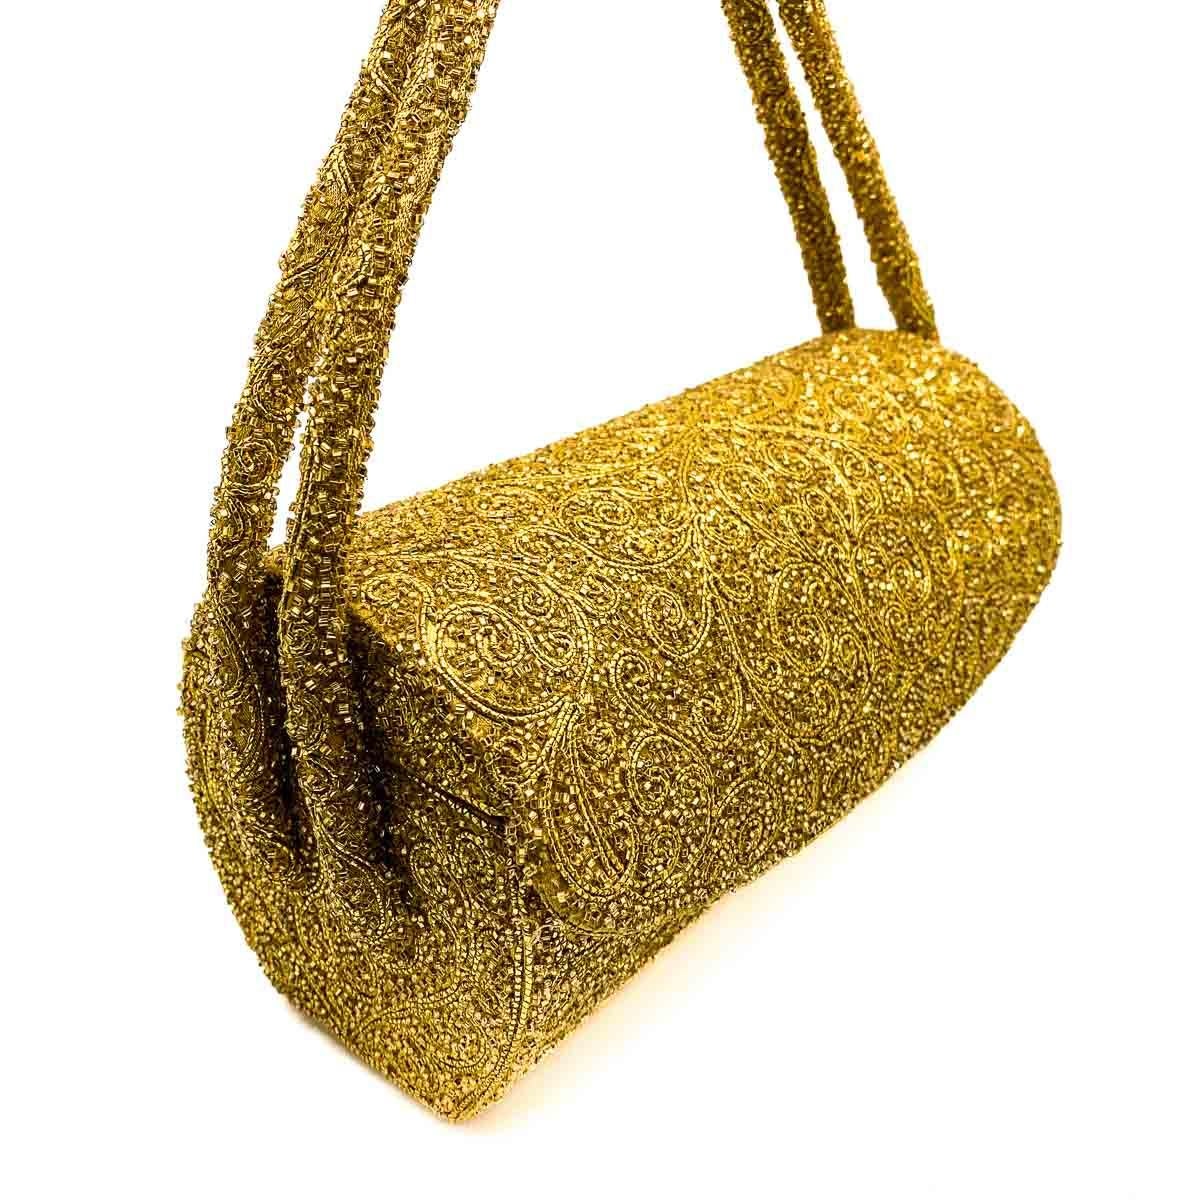 A fabulous and rare Vintage Nettie Rosenstein Evening Bag. A landscape cylinder inspired design is topped with a double handle and gloriously flaunts gold micro beading in a foliate design against a gold satin backdrop. The satin story continues to